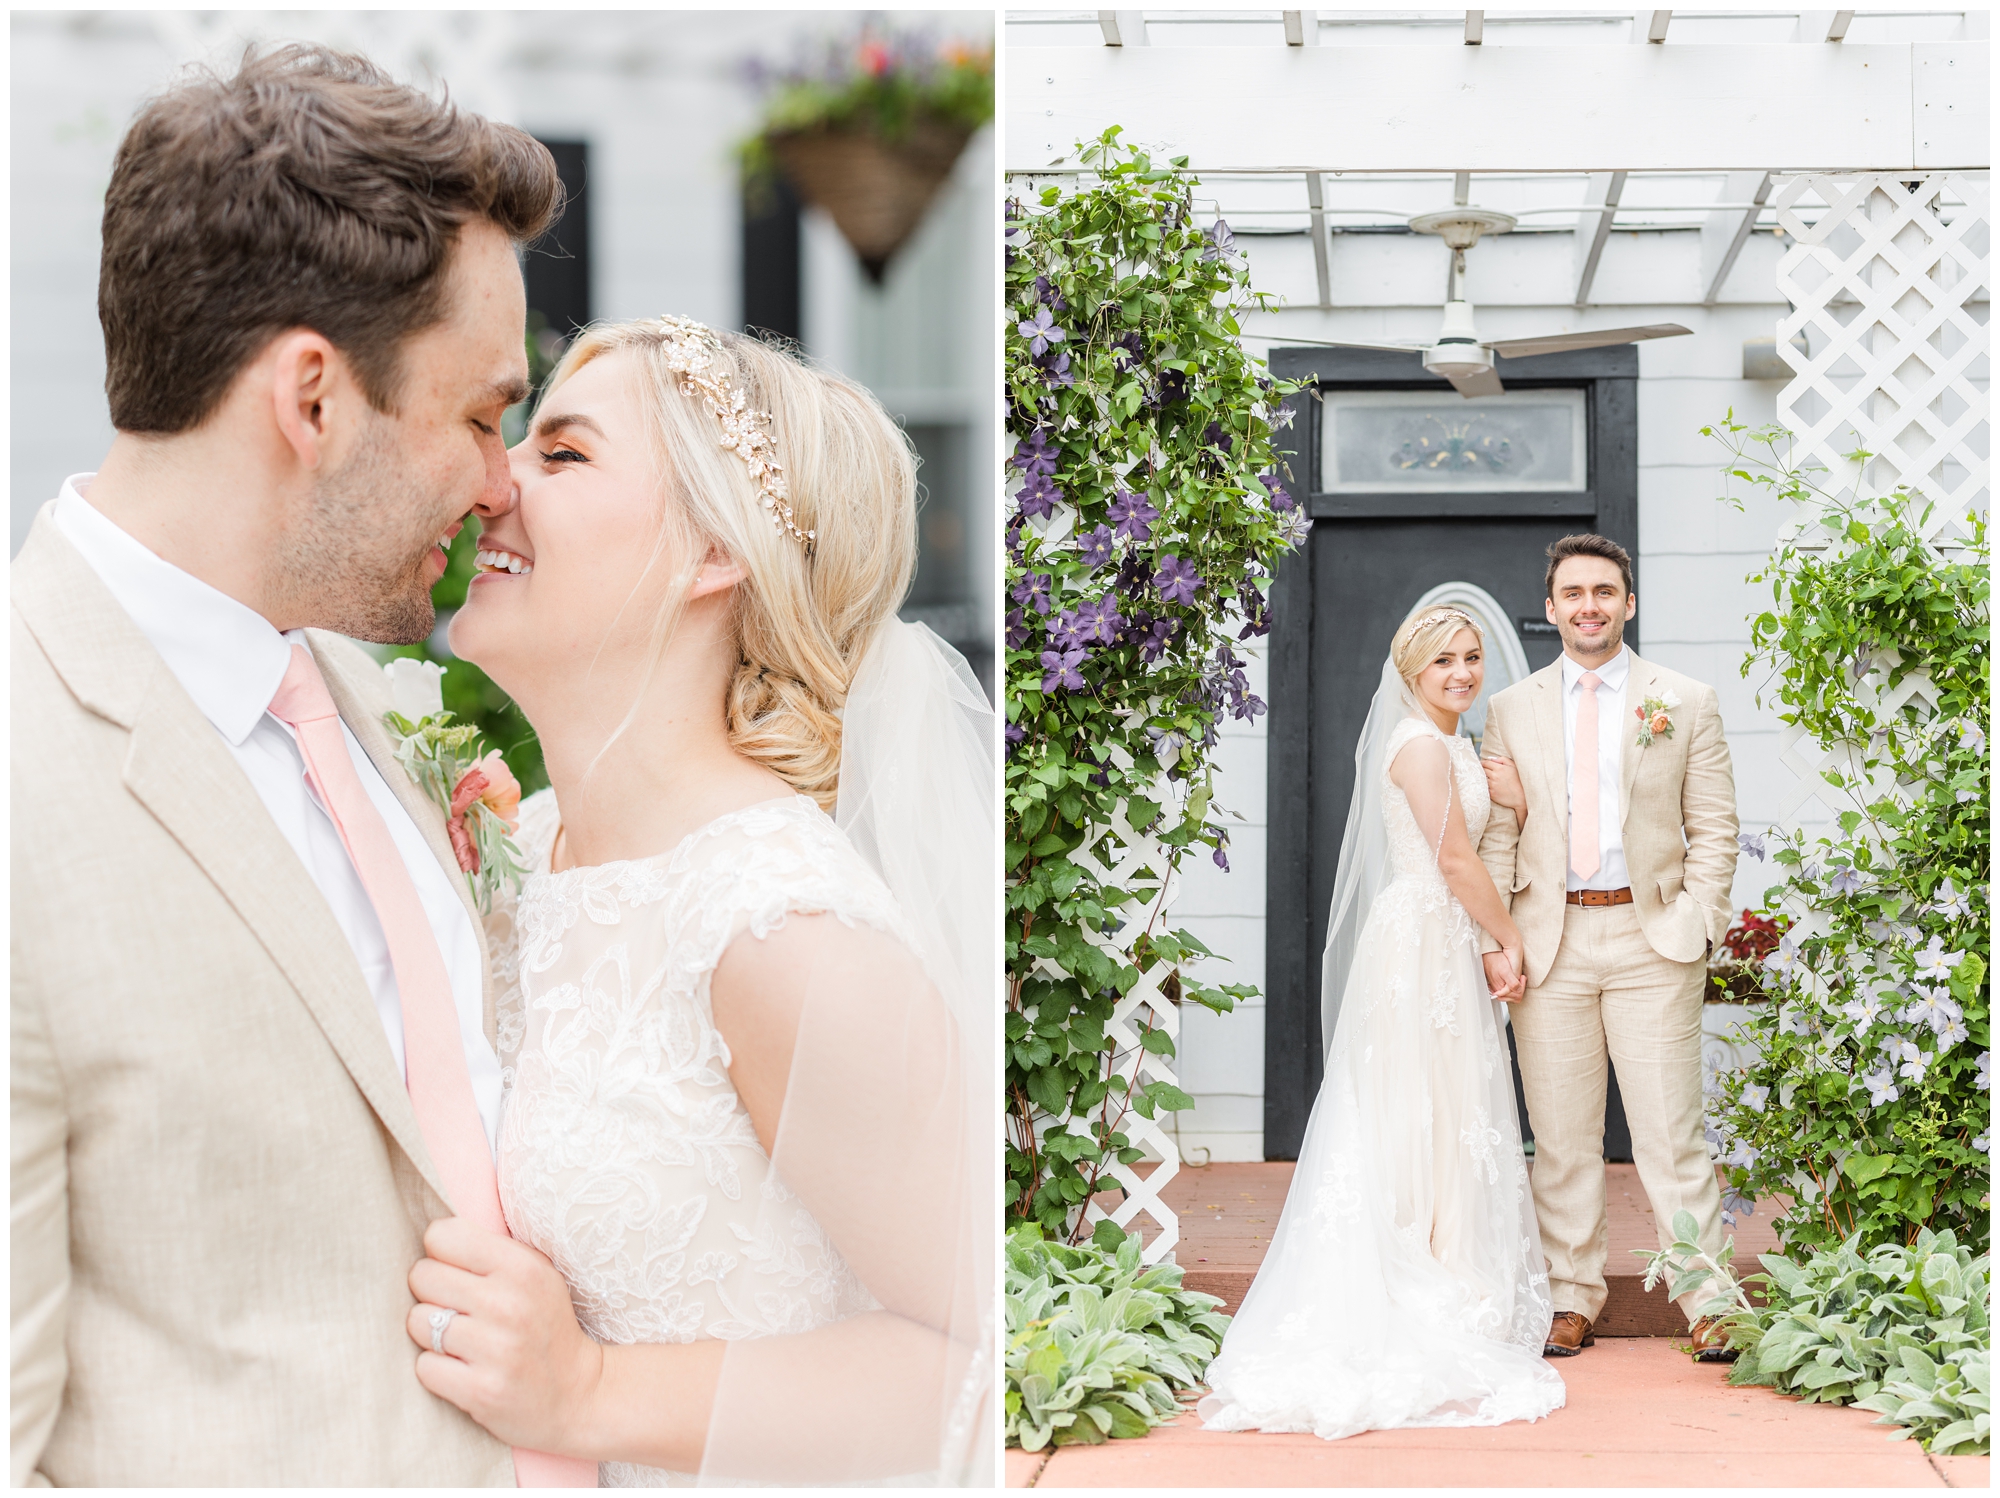 The bride and groom kiss in a portrait. In the second photo, the bride and groom pose in a portrait. 